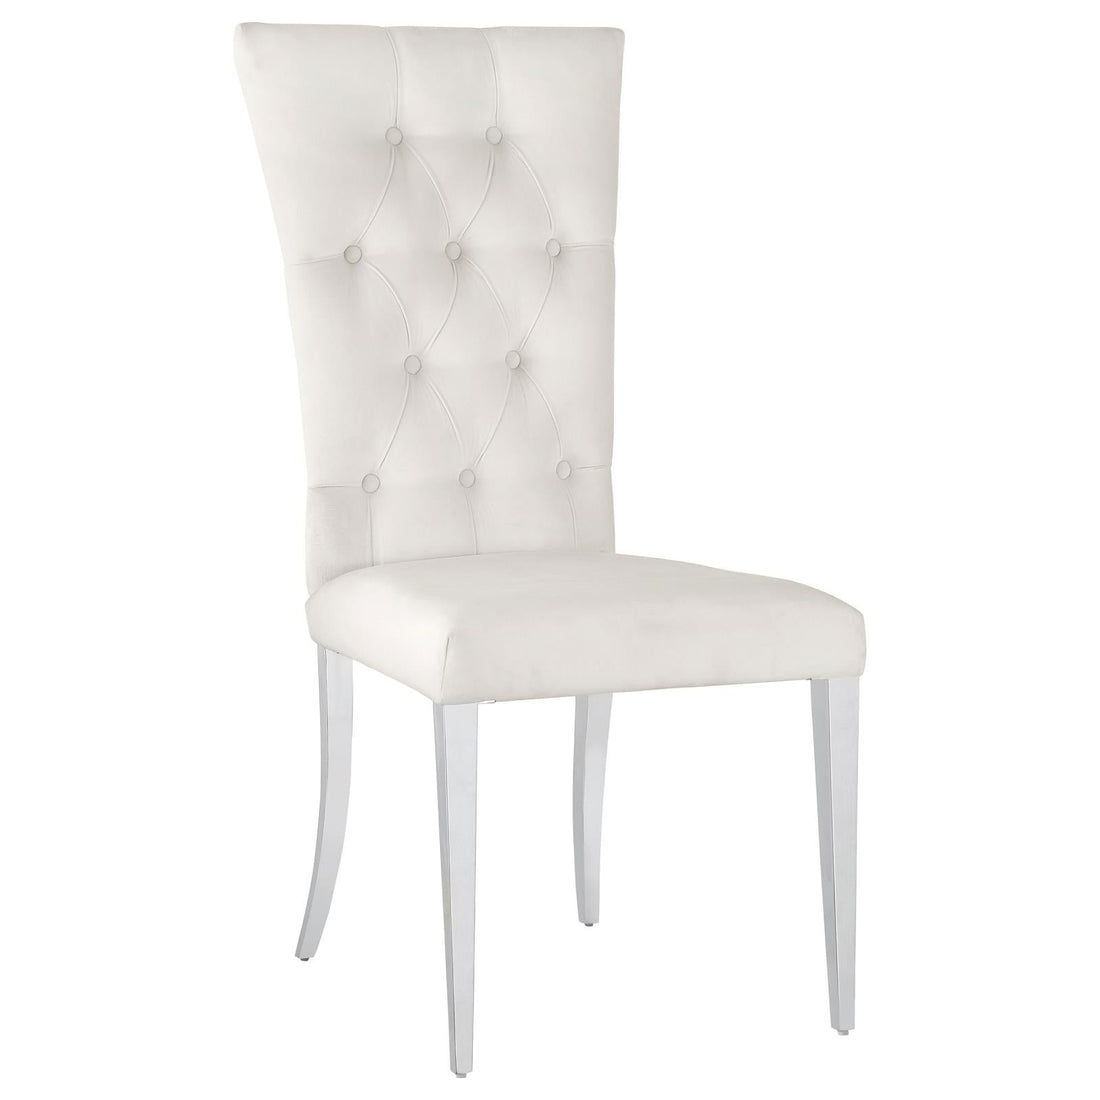 Kerwin White/Chrome Tufted Upholstered Side Chair, Set of 2 - 111102 - Bien Home Furniture &amp; Electronics